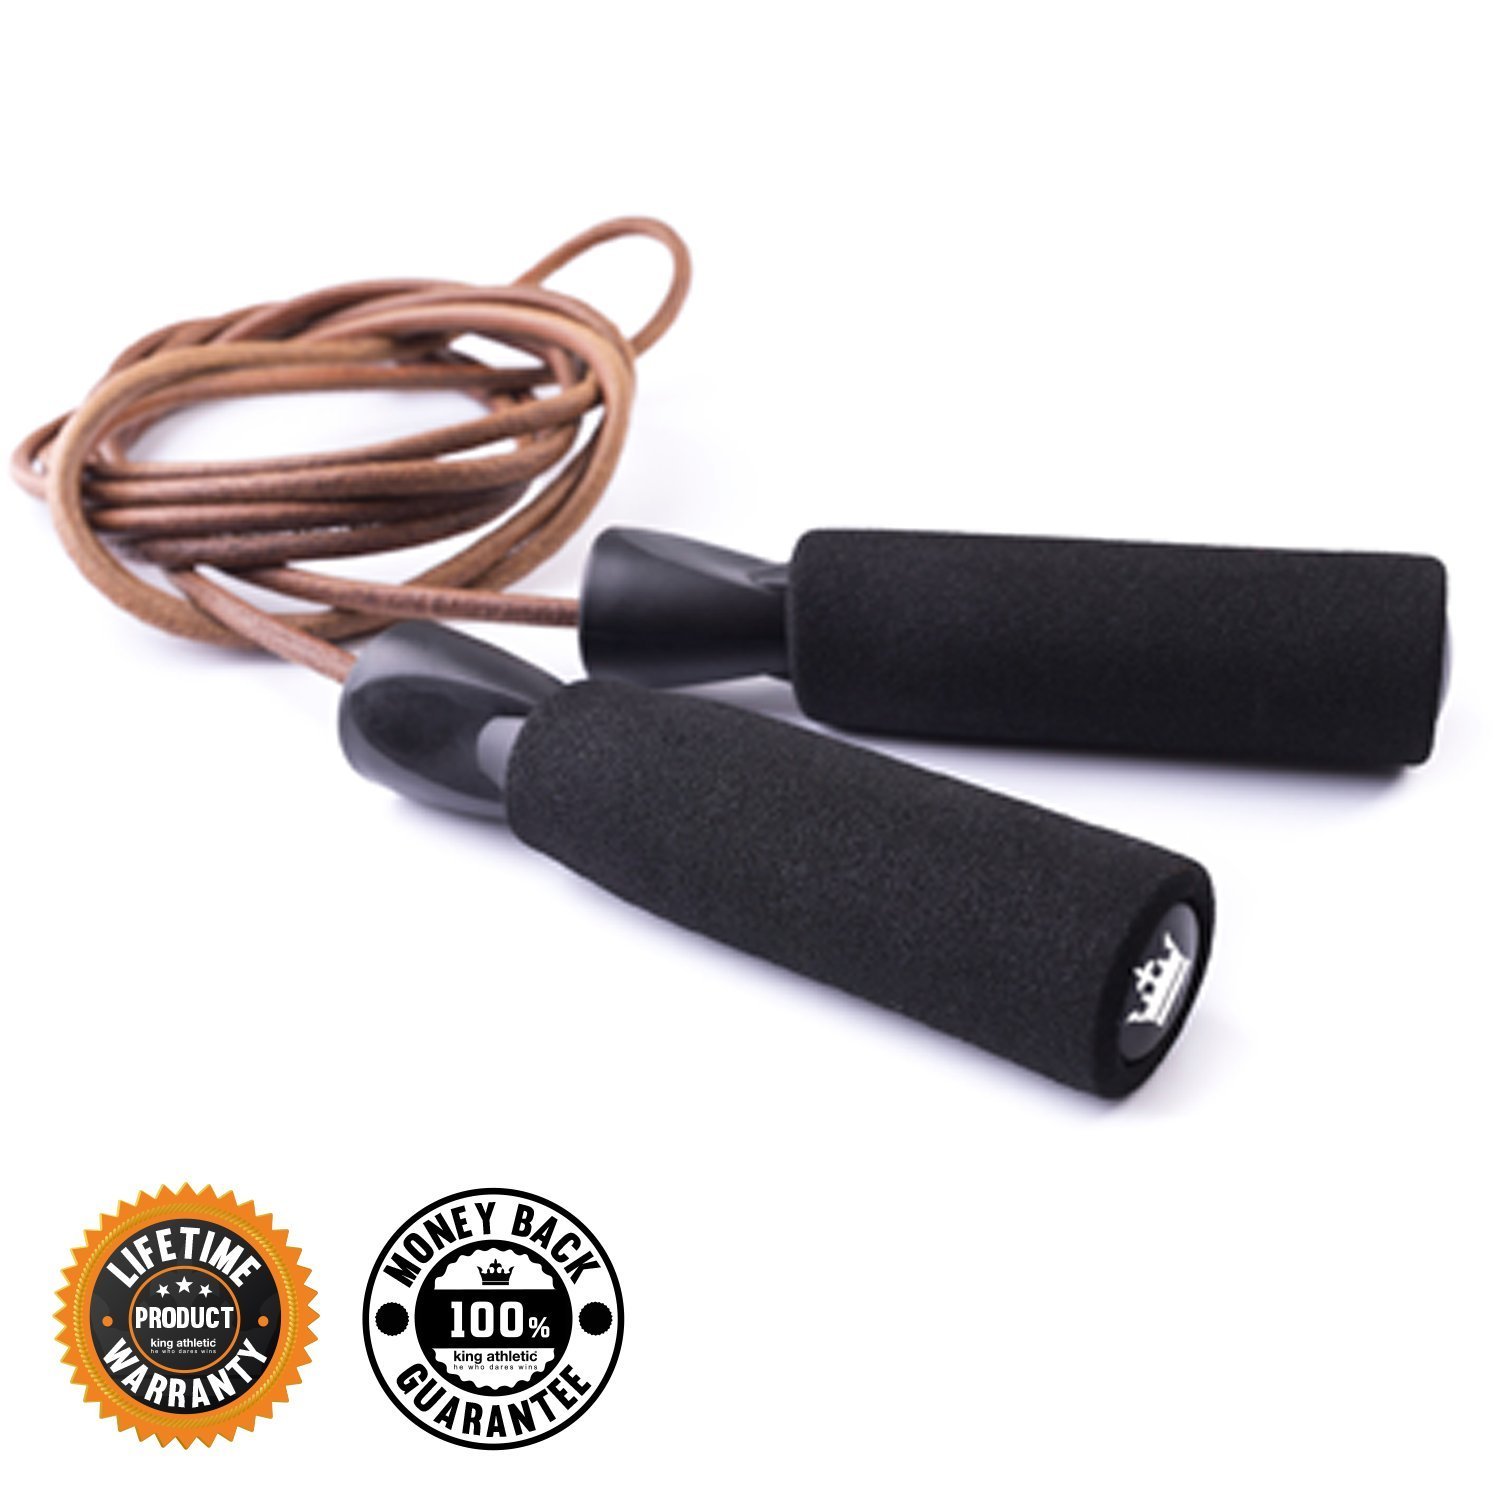 Adjustable Speed Jump Rope Fast Speed Rope 10 feet Strong Cable for Mastering Double Unders Exercise and Fitness MMA Best for Crossfit WODs Boxing QCT Jump Rope